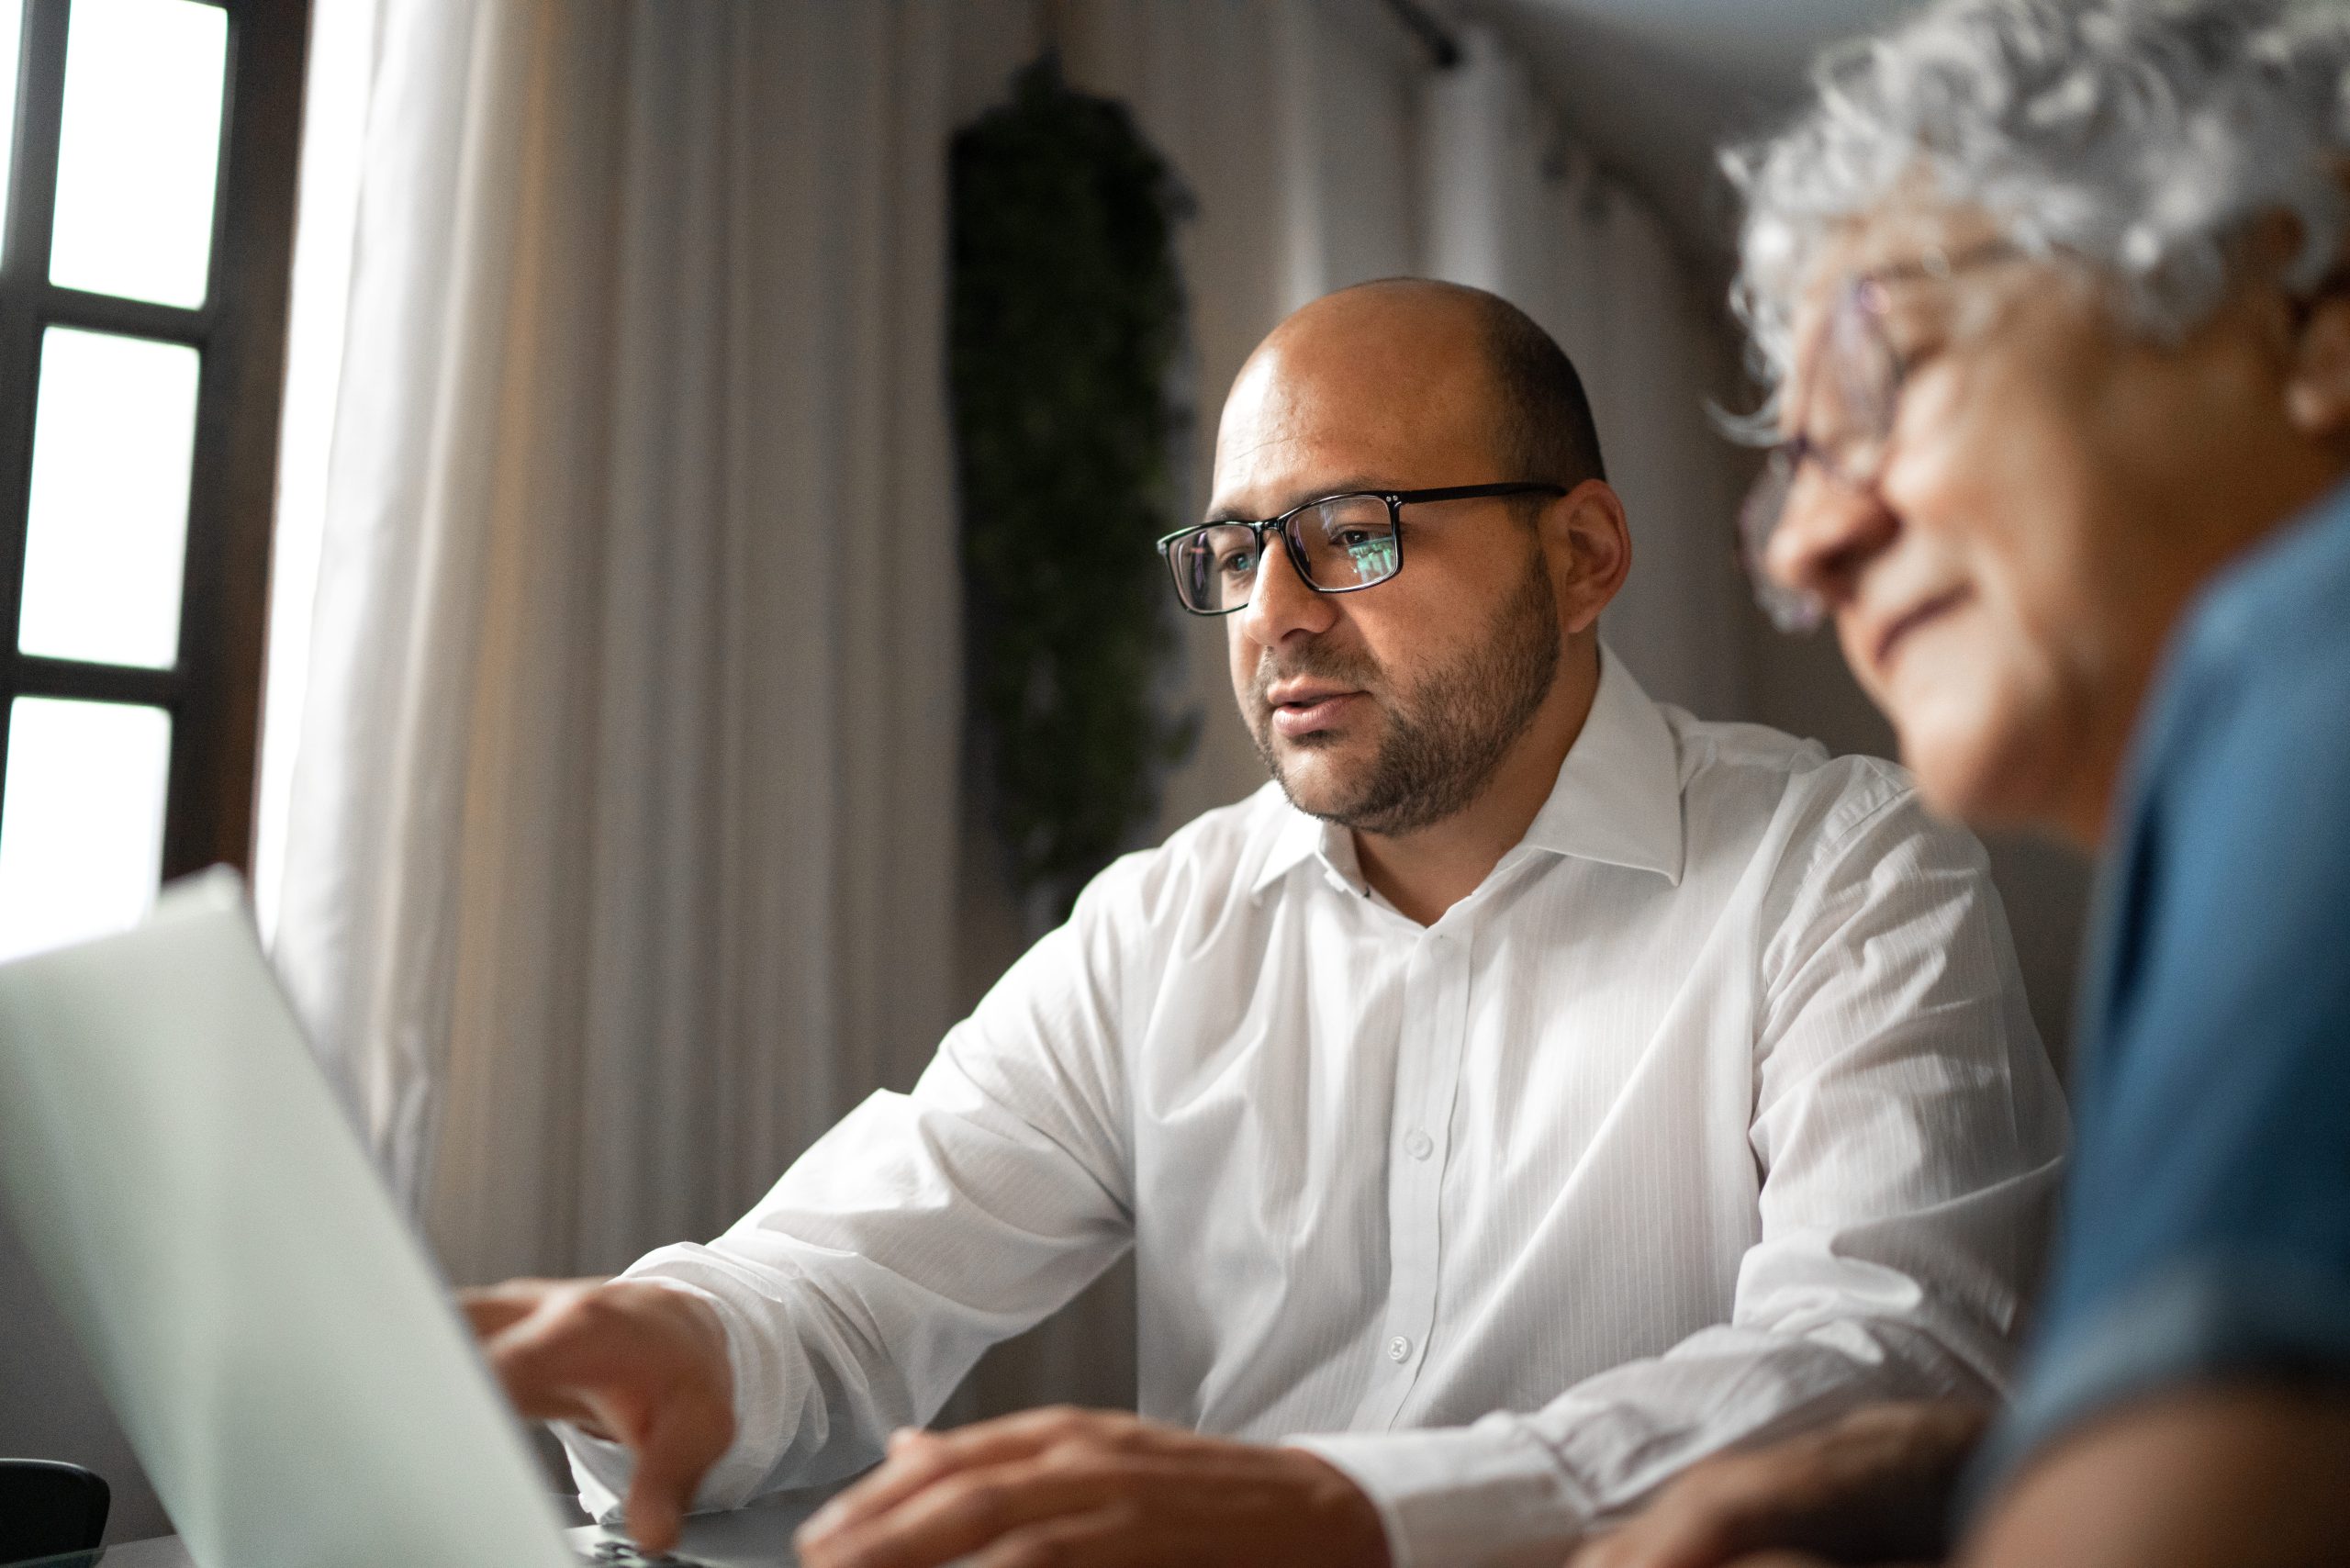 A middle-aged man shows an elderly woman something on a laptop while they sit at a table together.